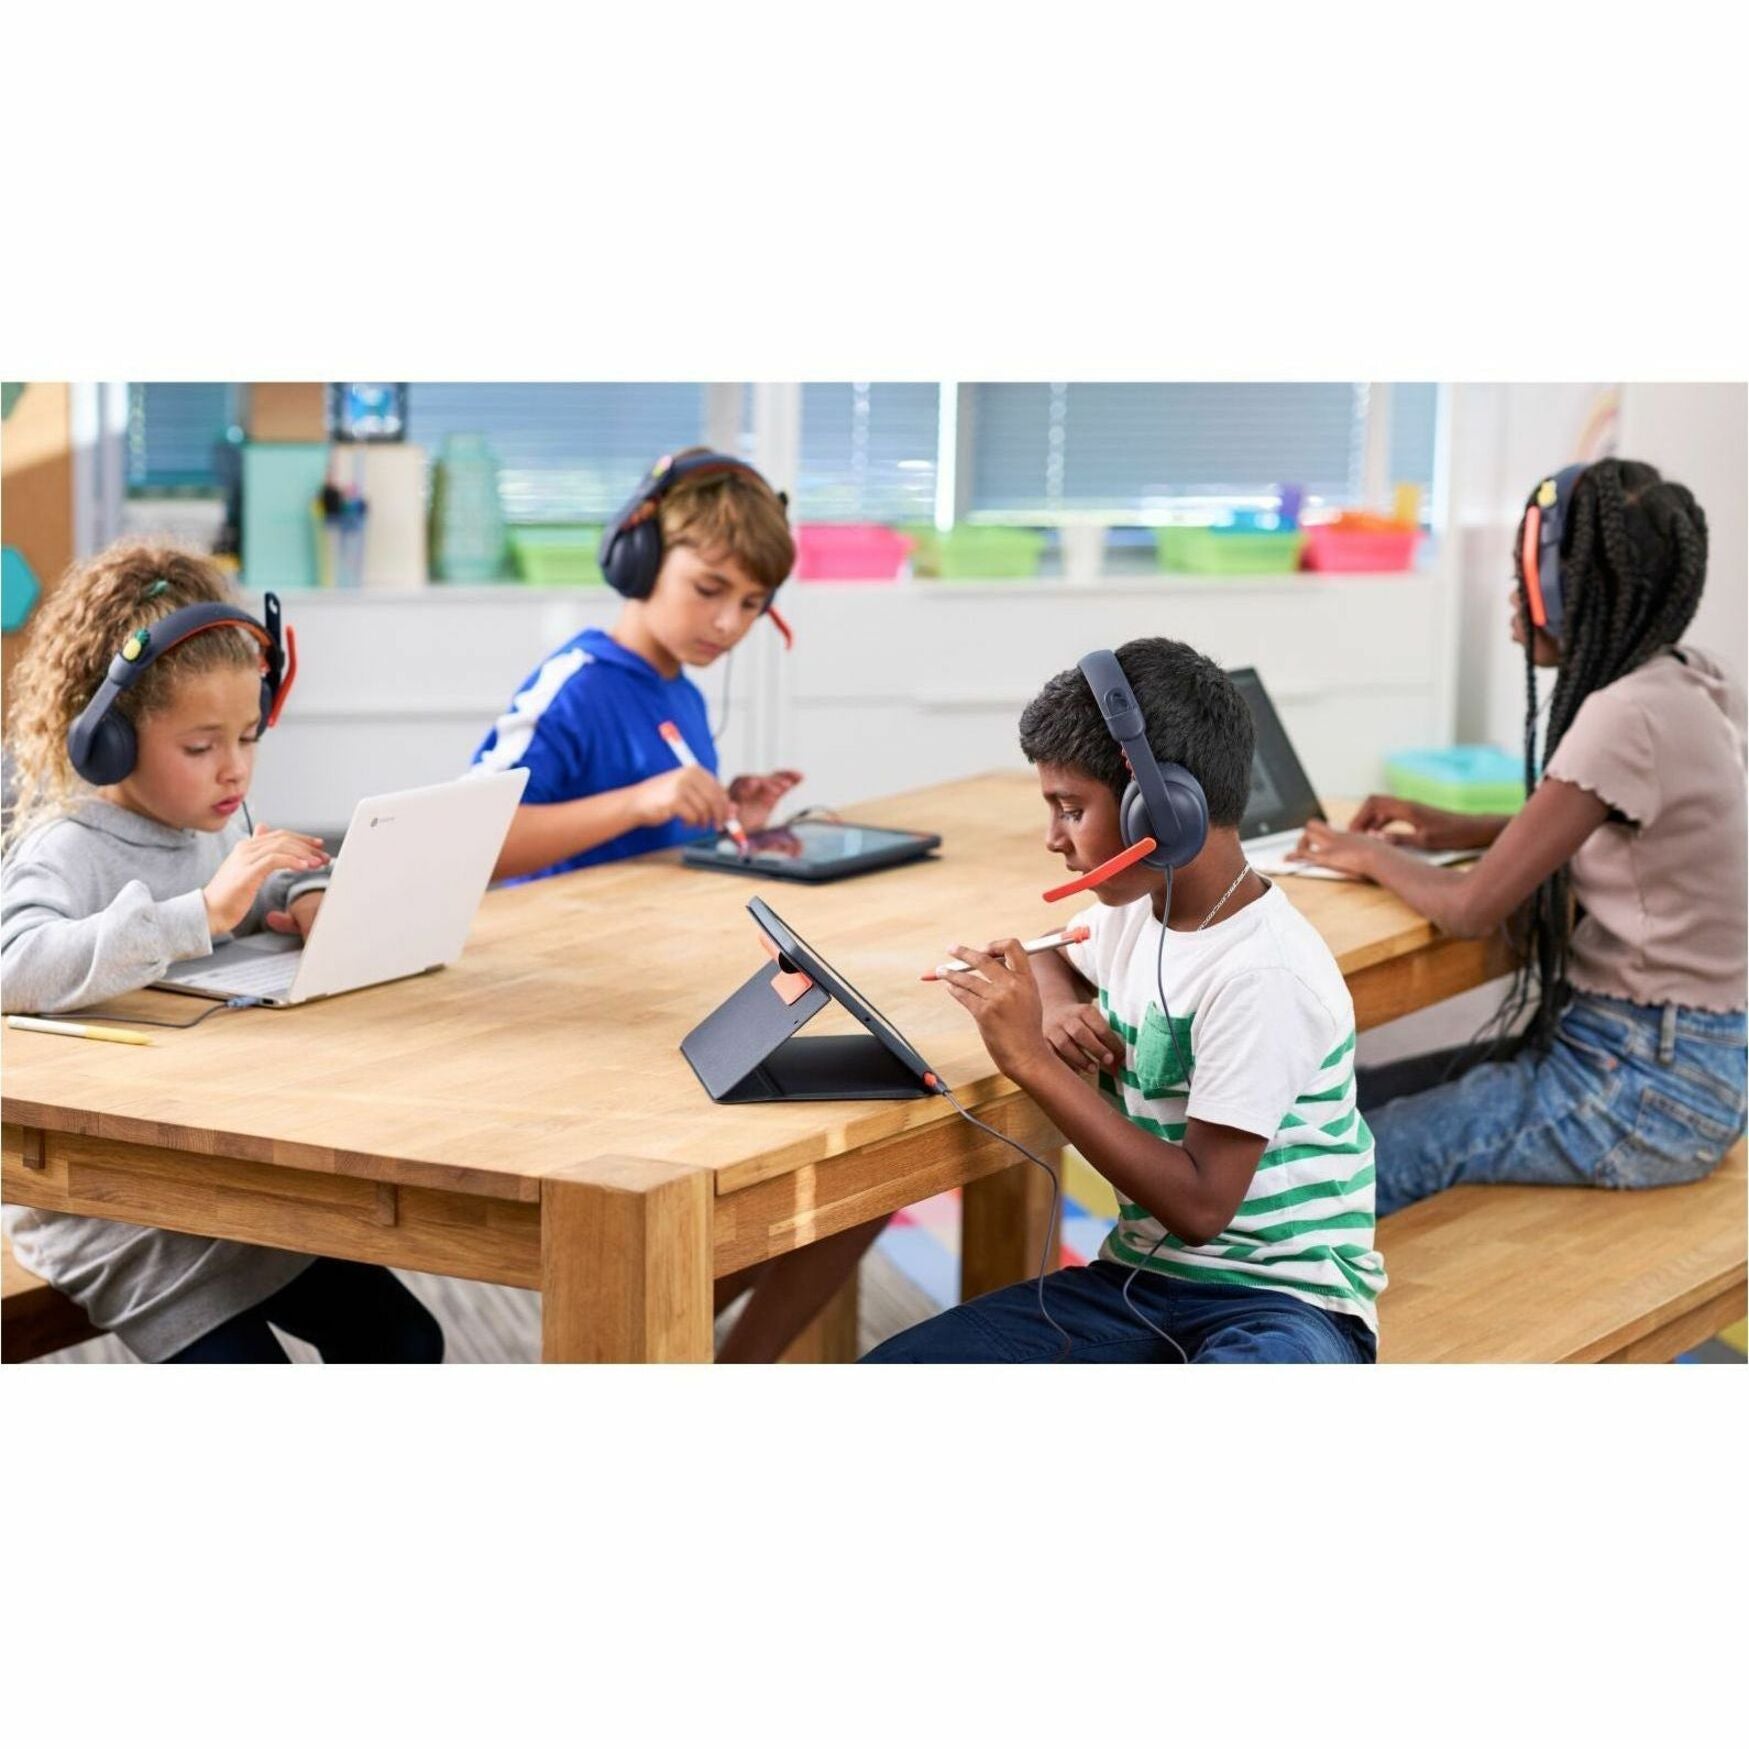 Logitech 981-001395 Zone Learn Wired Headsets for Learners, Rotating Microphone, Plug and Play, Noise Isolation